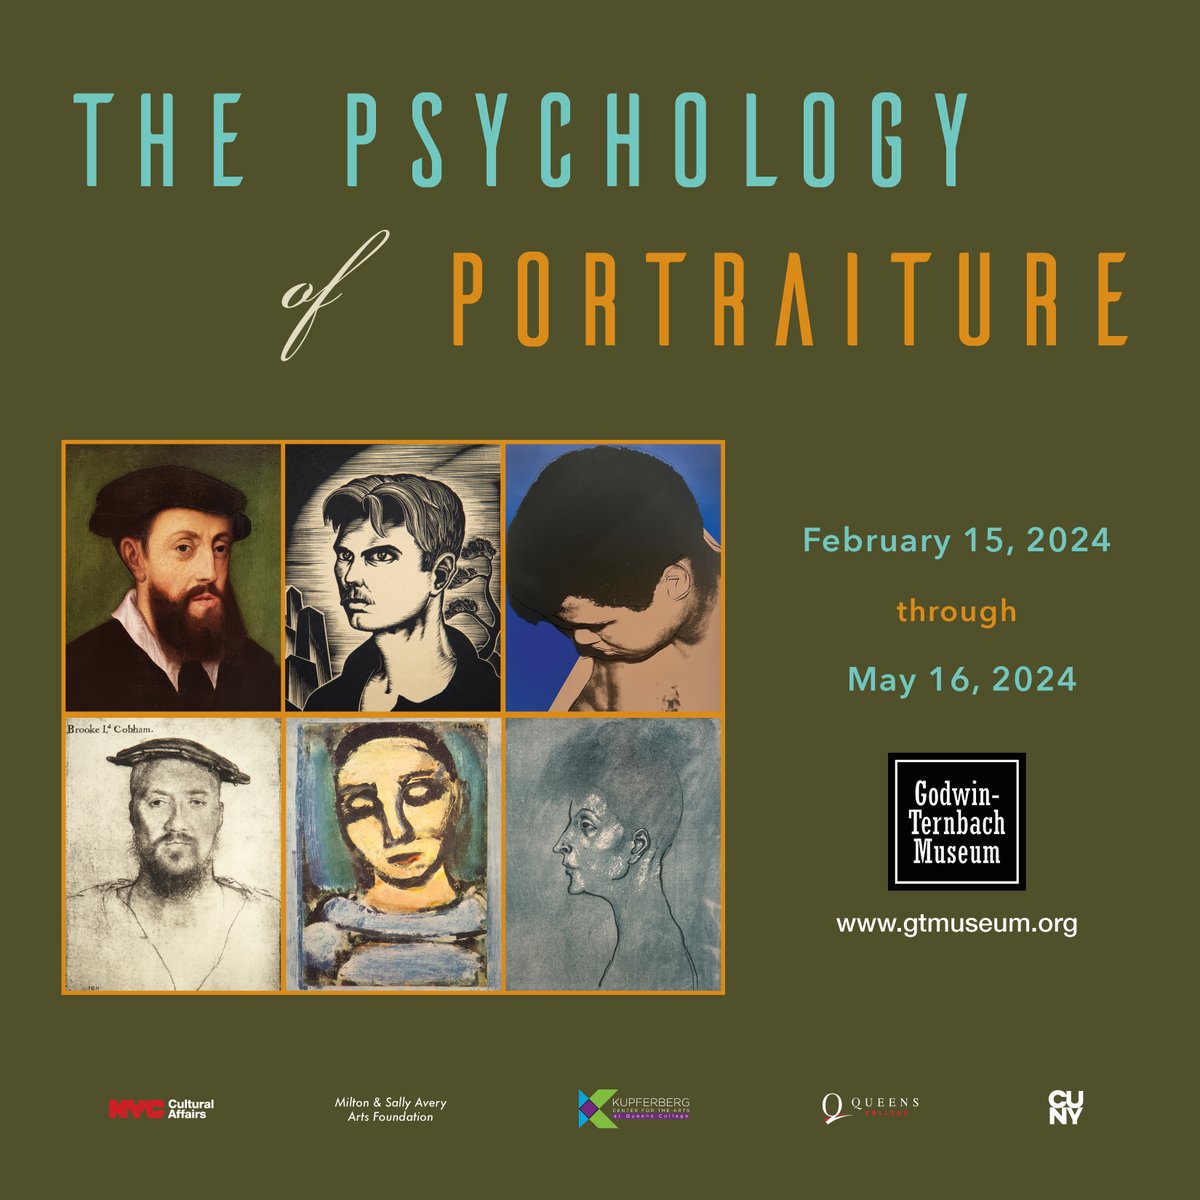 The Godwin-Ternbach Museum invites you to an opening reception of The Psychology of Portraiture, featuring prints, drawings, paintings, and sculptures that reveal the universal motivation of visual artists to portray states of mind. The reception is on Thurs, Feb. 15, 6-8 pm!